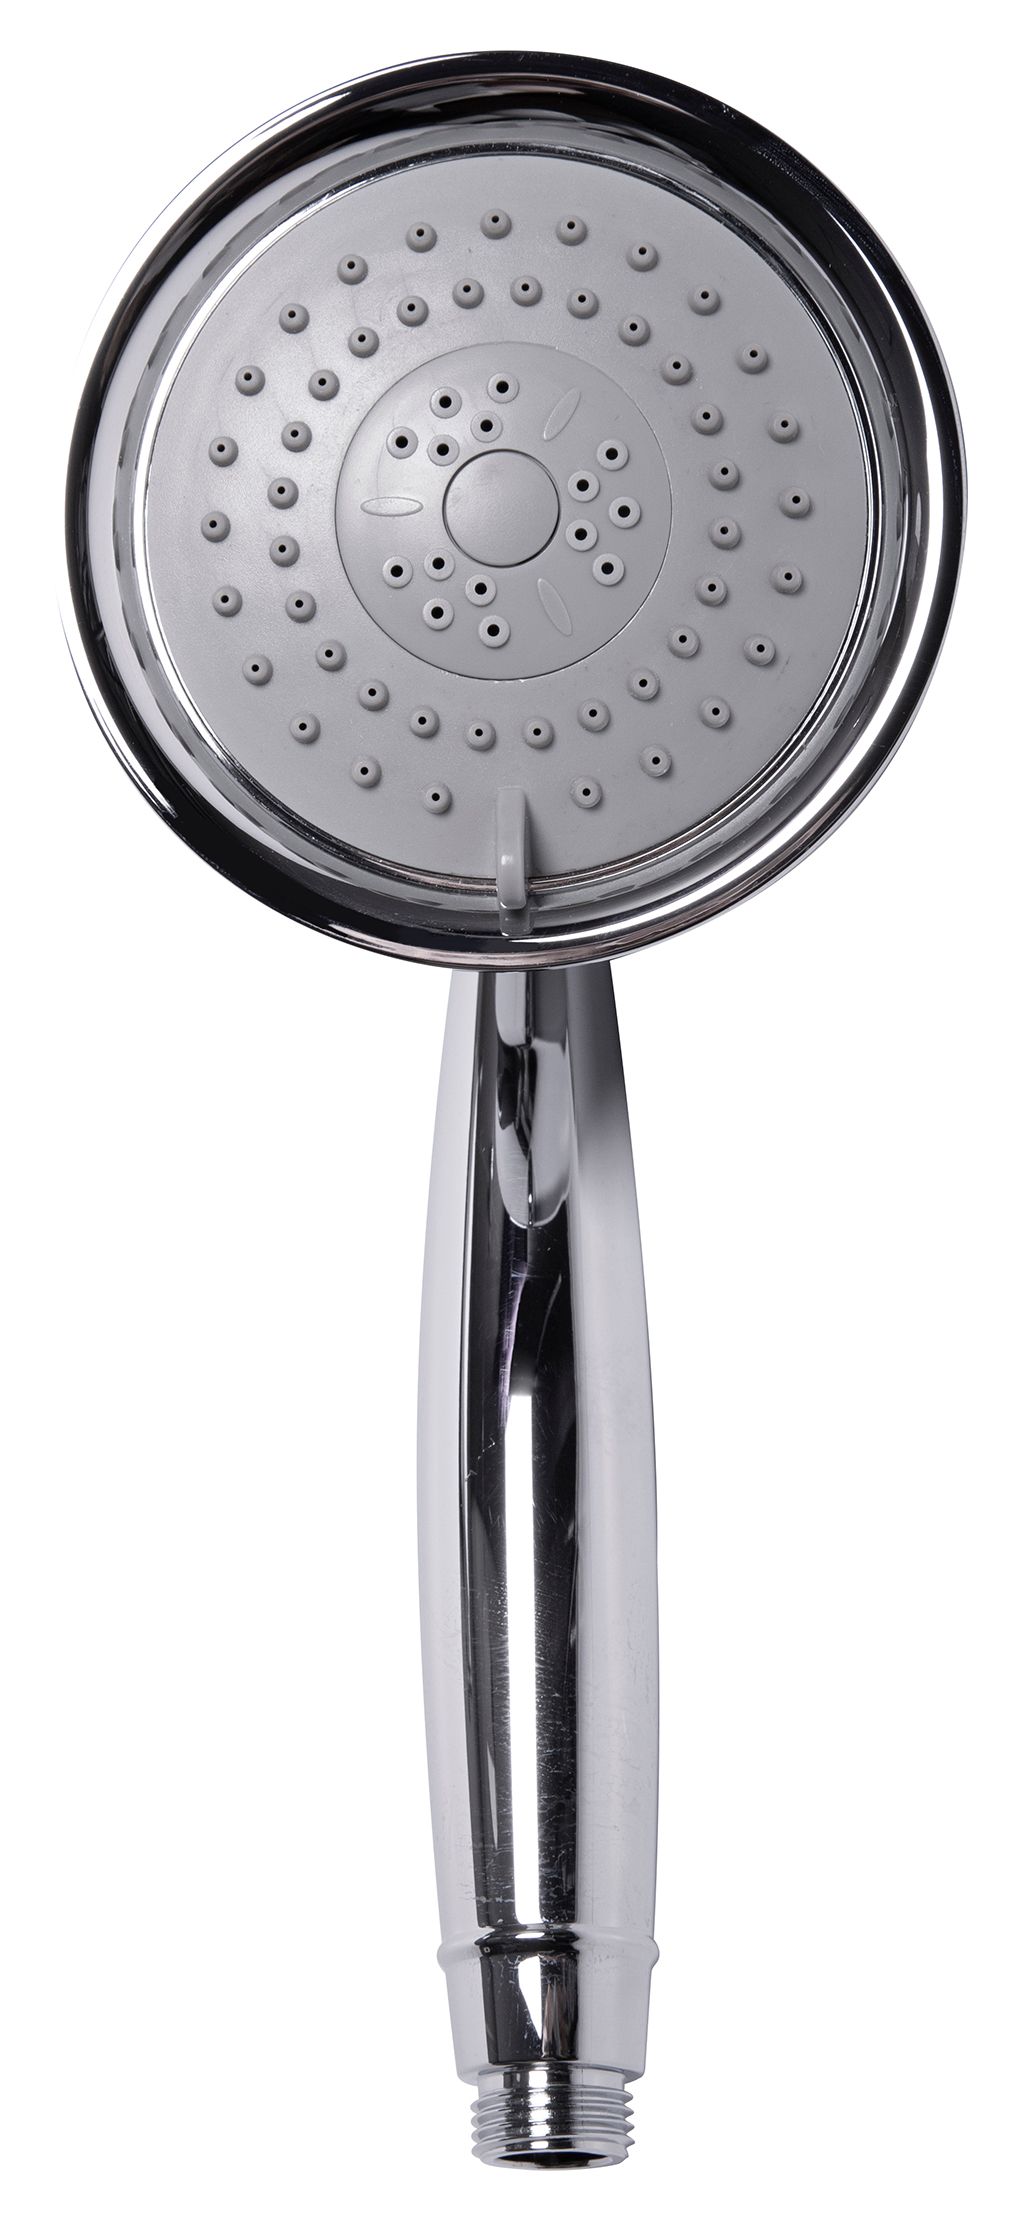 Image of Croydex Replacement Bath/Shower Classic Head - Chrome